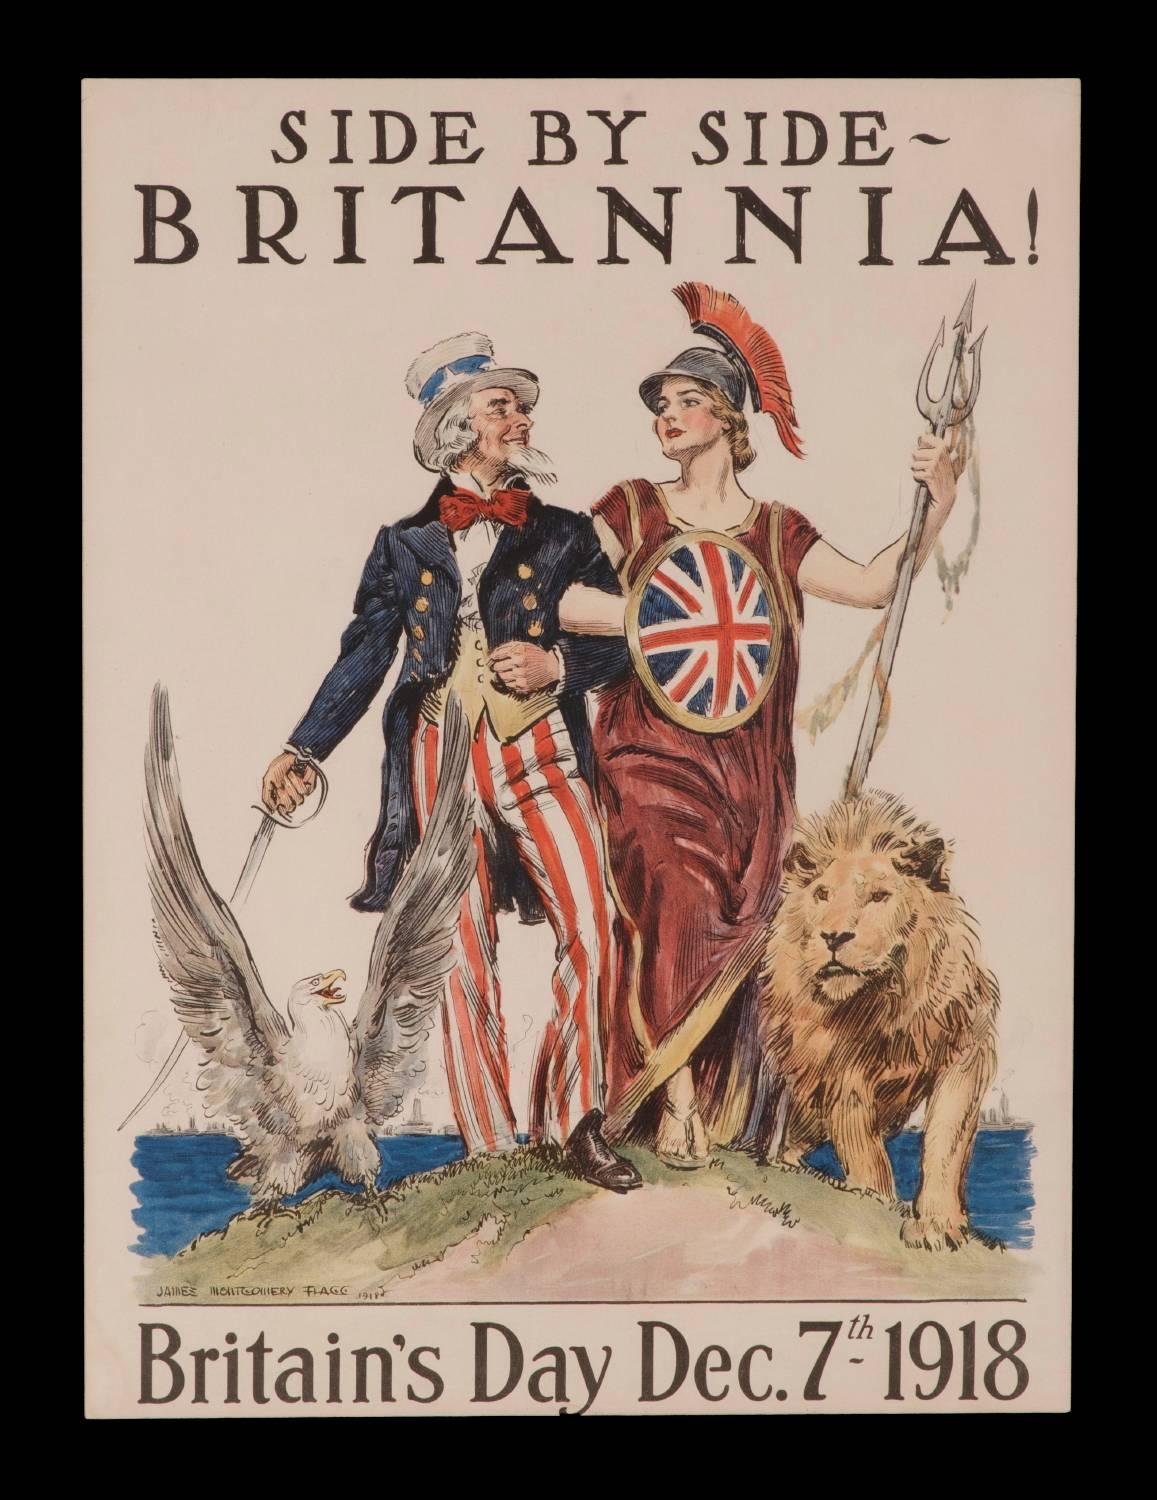 WWI poster featuring Uncle Sam and Lady Britannia, arm-in-arm, accompanied by the American eagle and British lion, illustrated by James Montgomery Flagg to commemorate Britain’s day, Dec. 7th, 1918:

Beautiful WWI poster with artwork rendered by